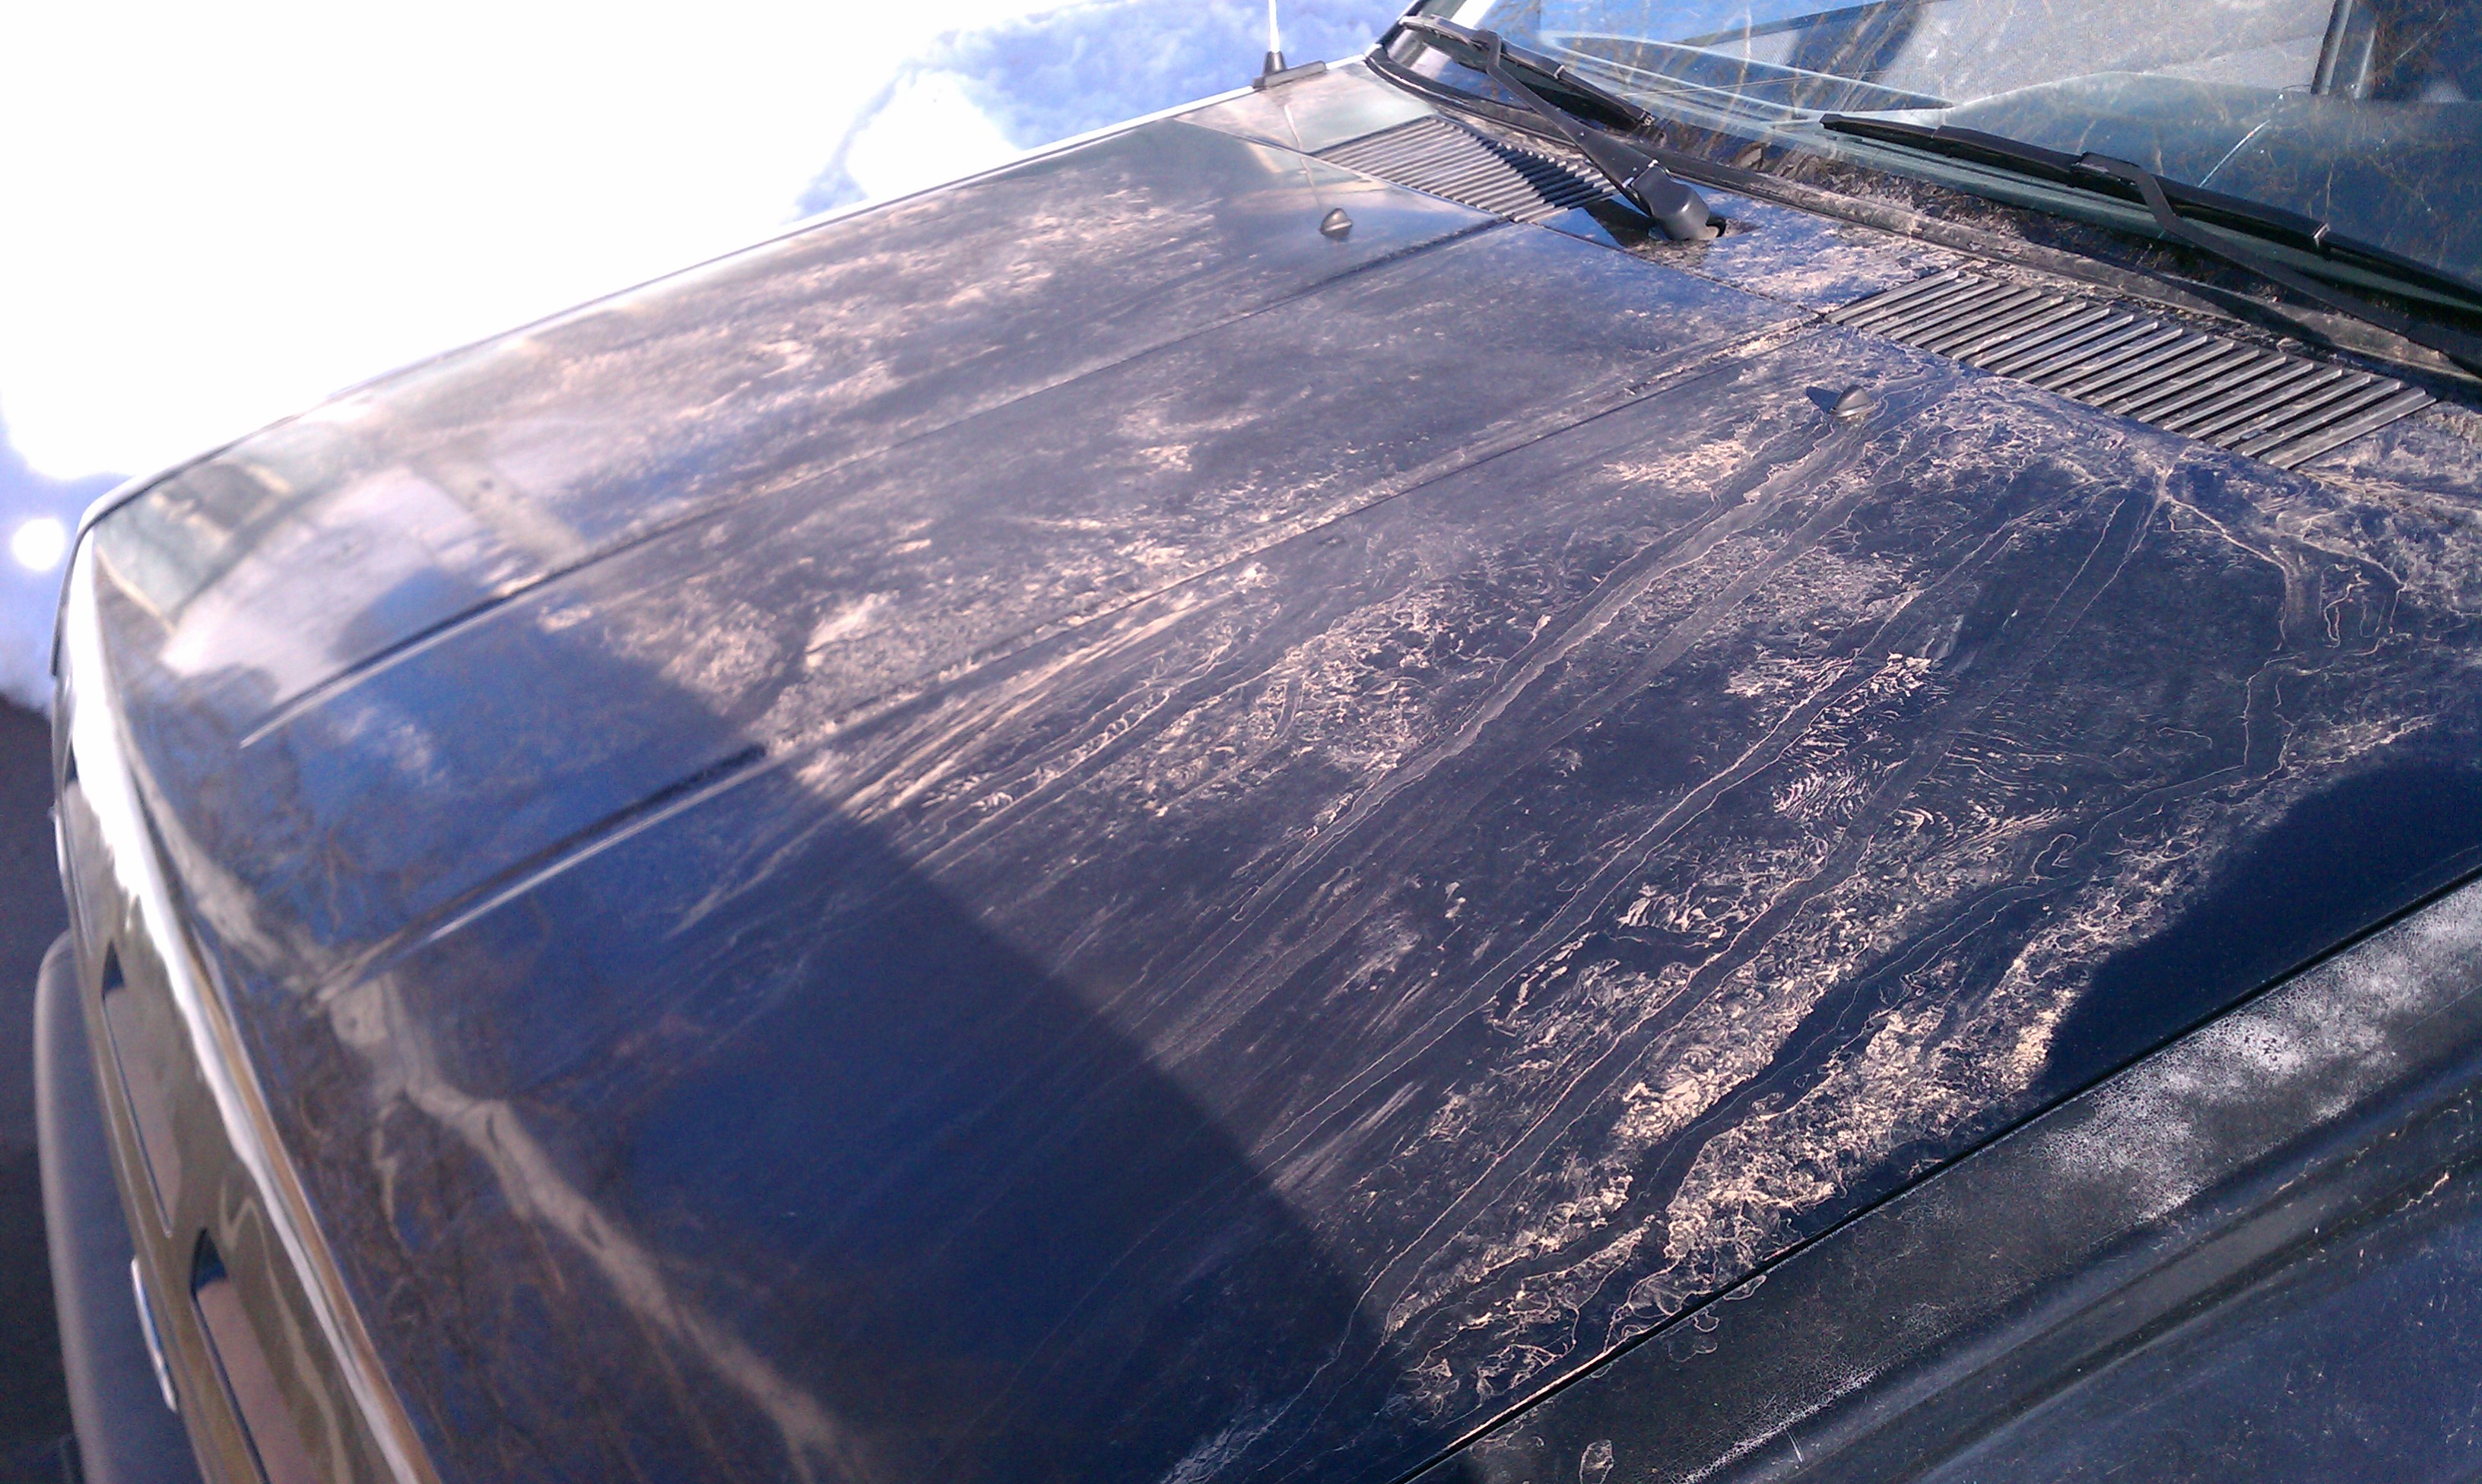 Dust residue on a vehicle after the snow had melted